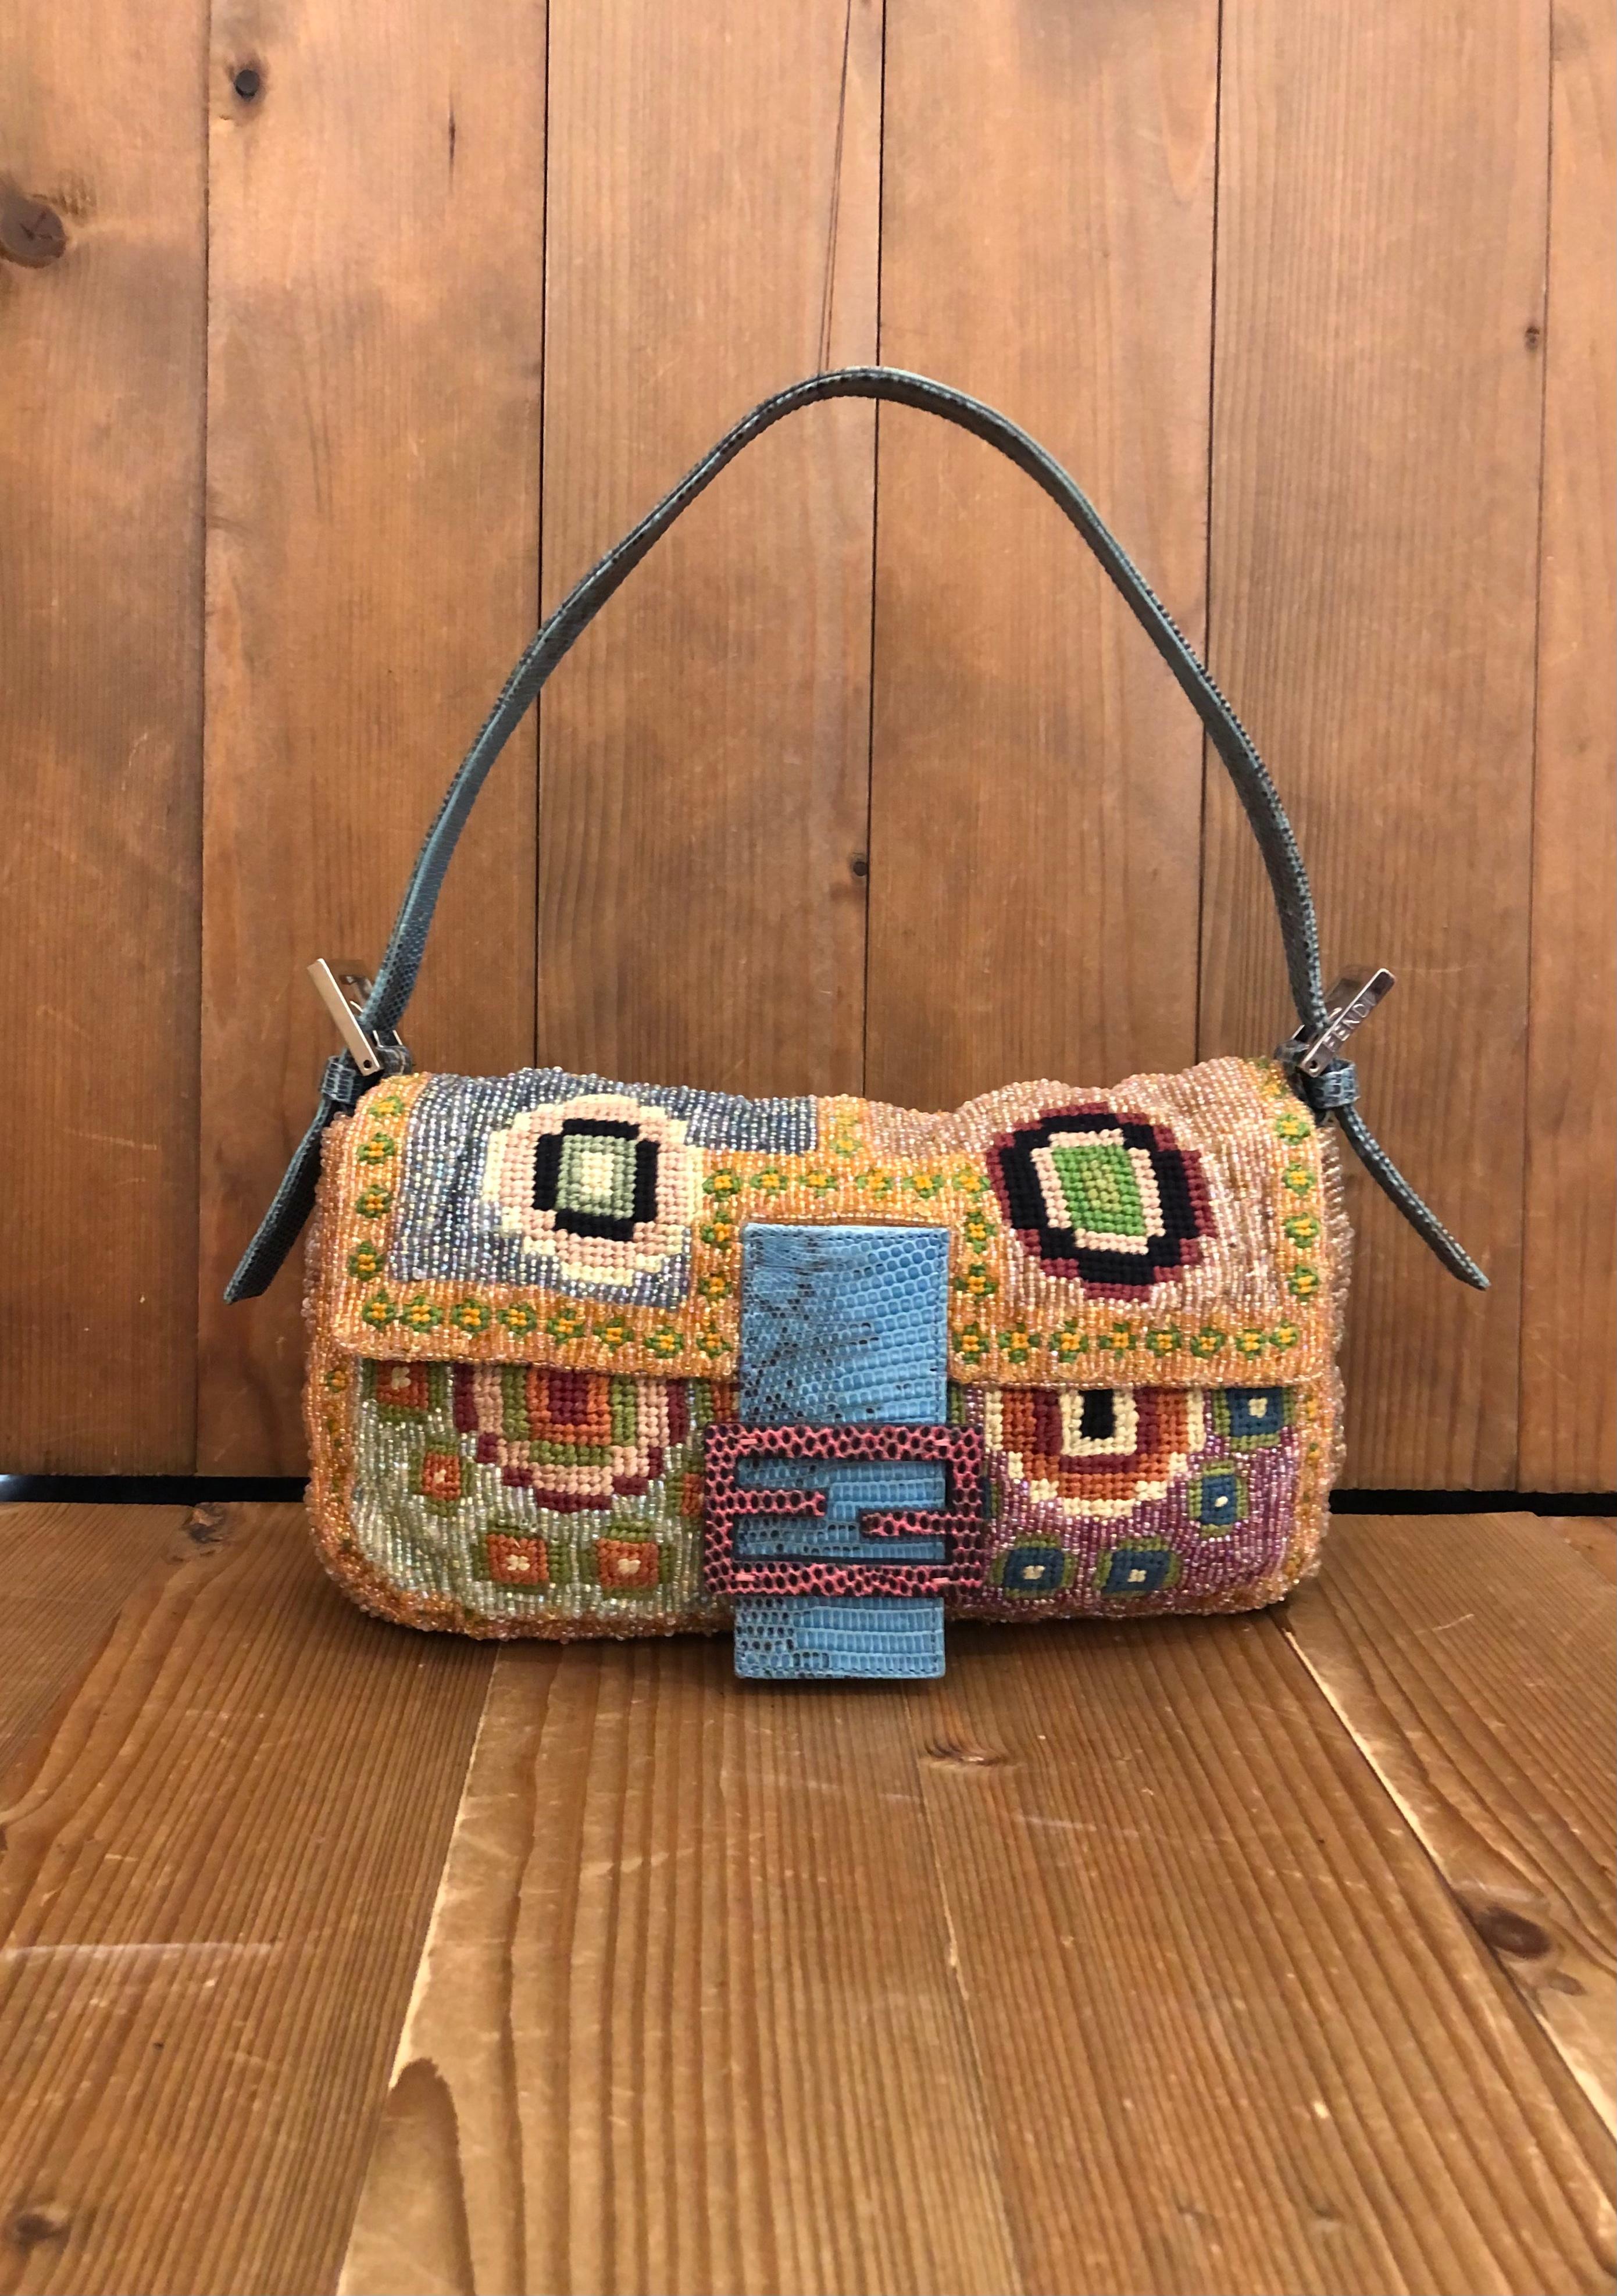 This iconic Fendi Baguette hand bag is exquisitely crafted of embroidery and beads in various colors and trimmed with exotic leather in turquoise. Front flap magnetic snap closure open to a silk satin interior in fluorescent green featuring one